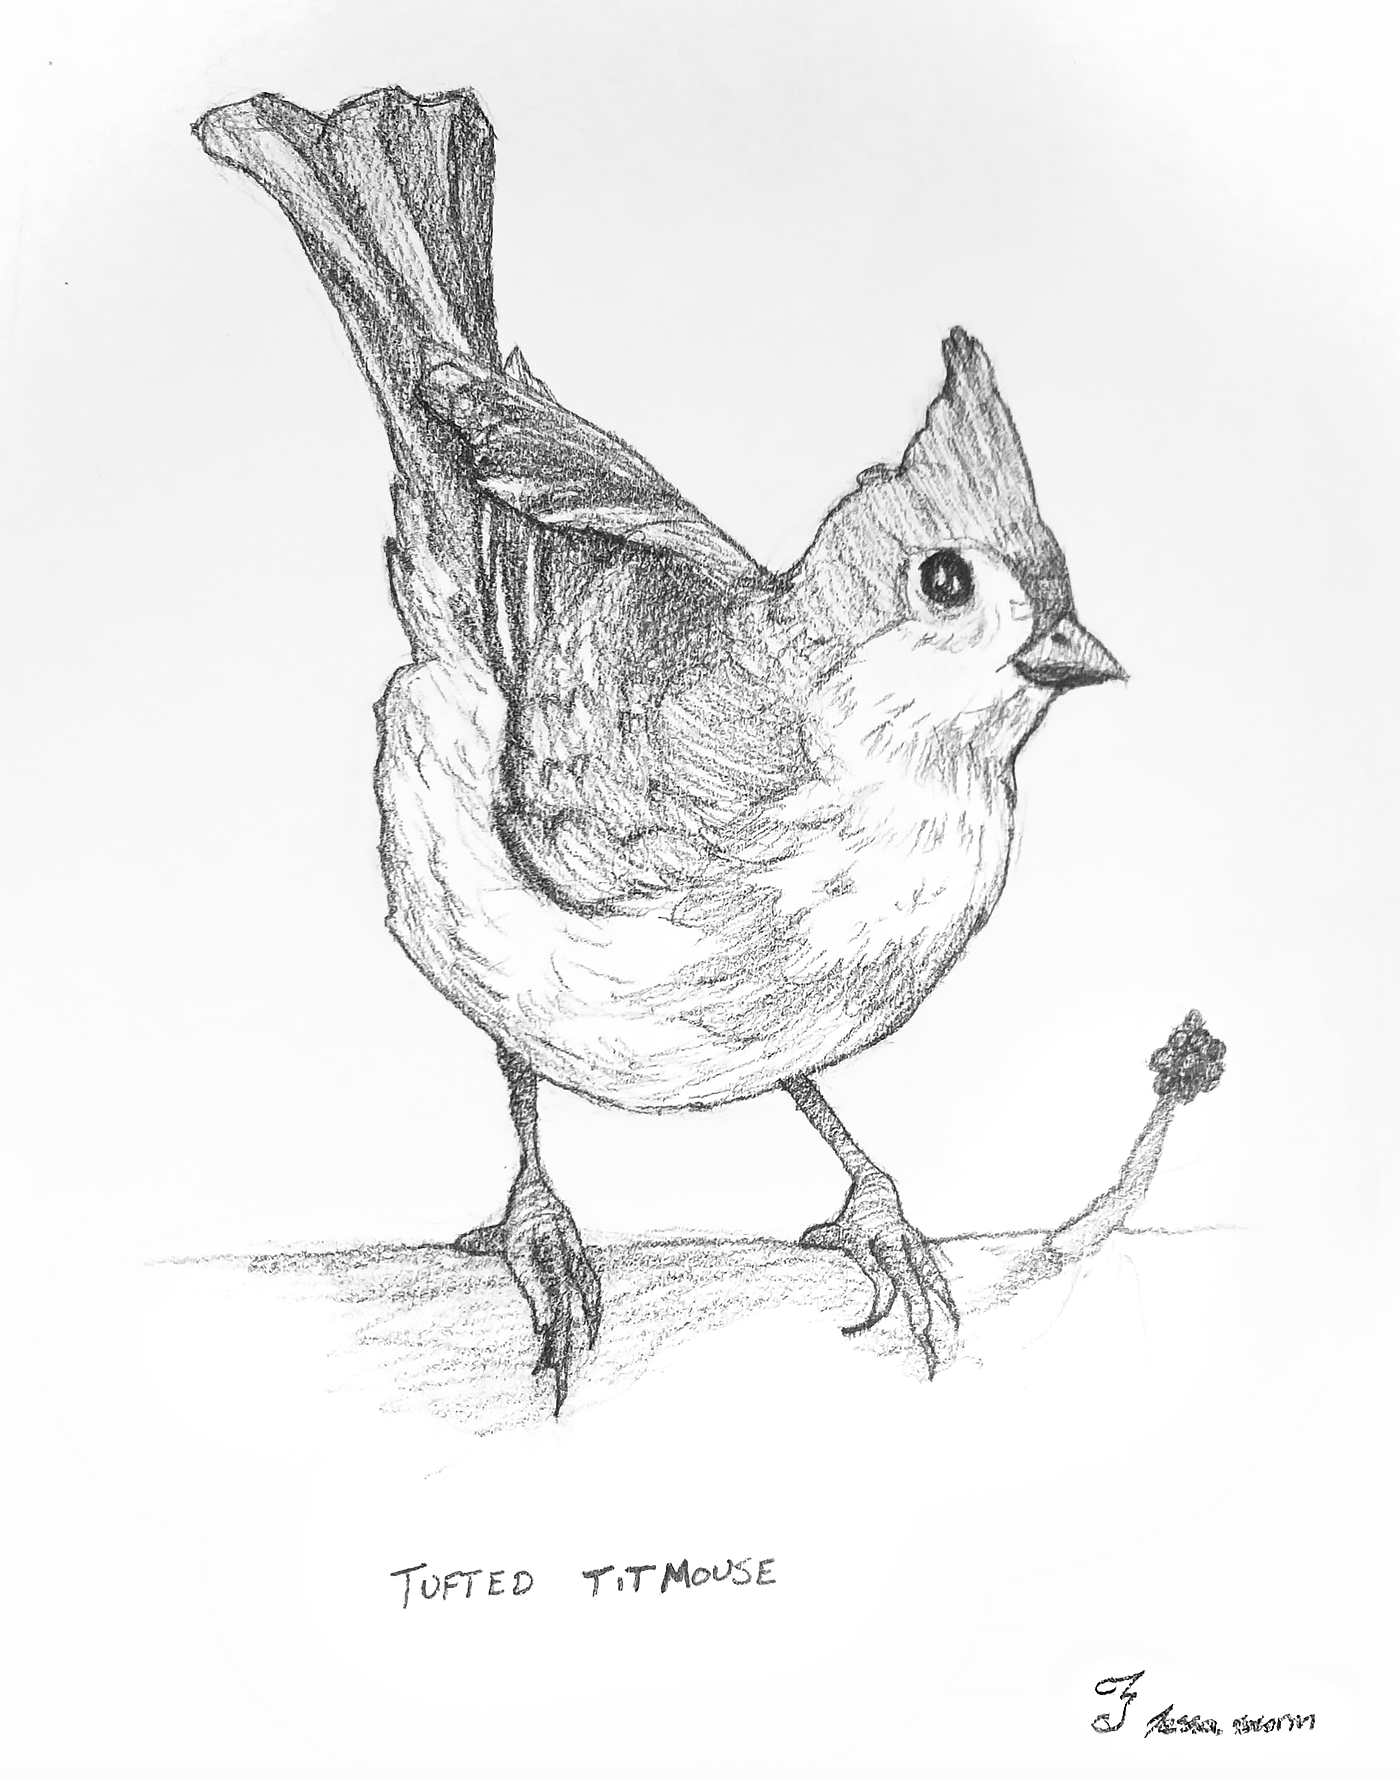 Study of a Tufted Titmouse